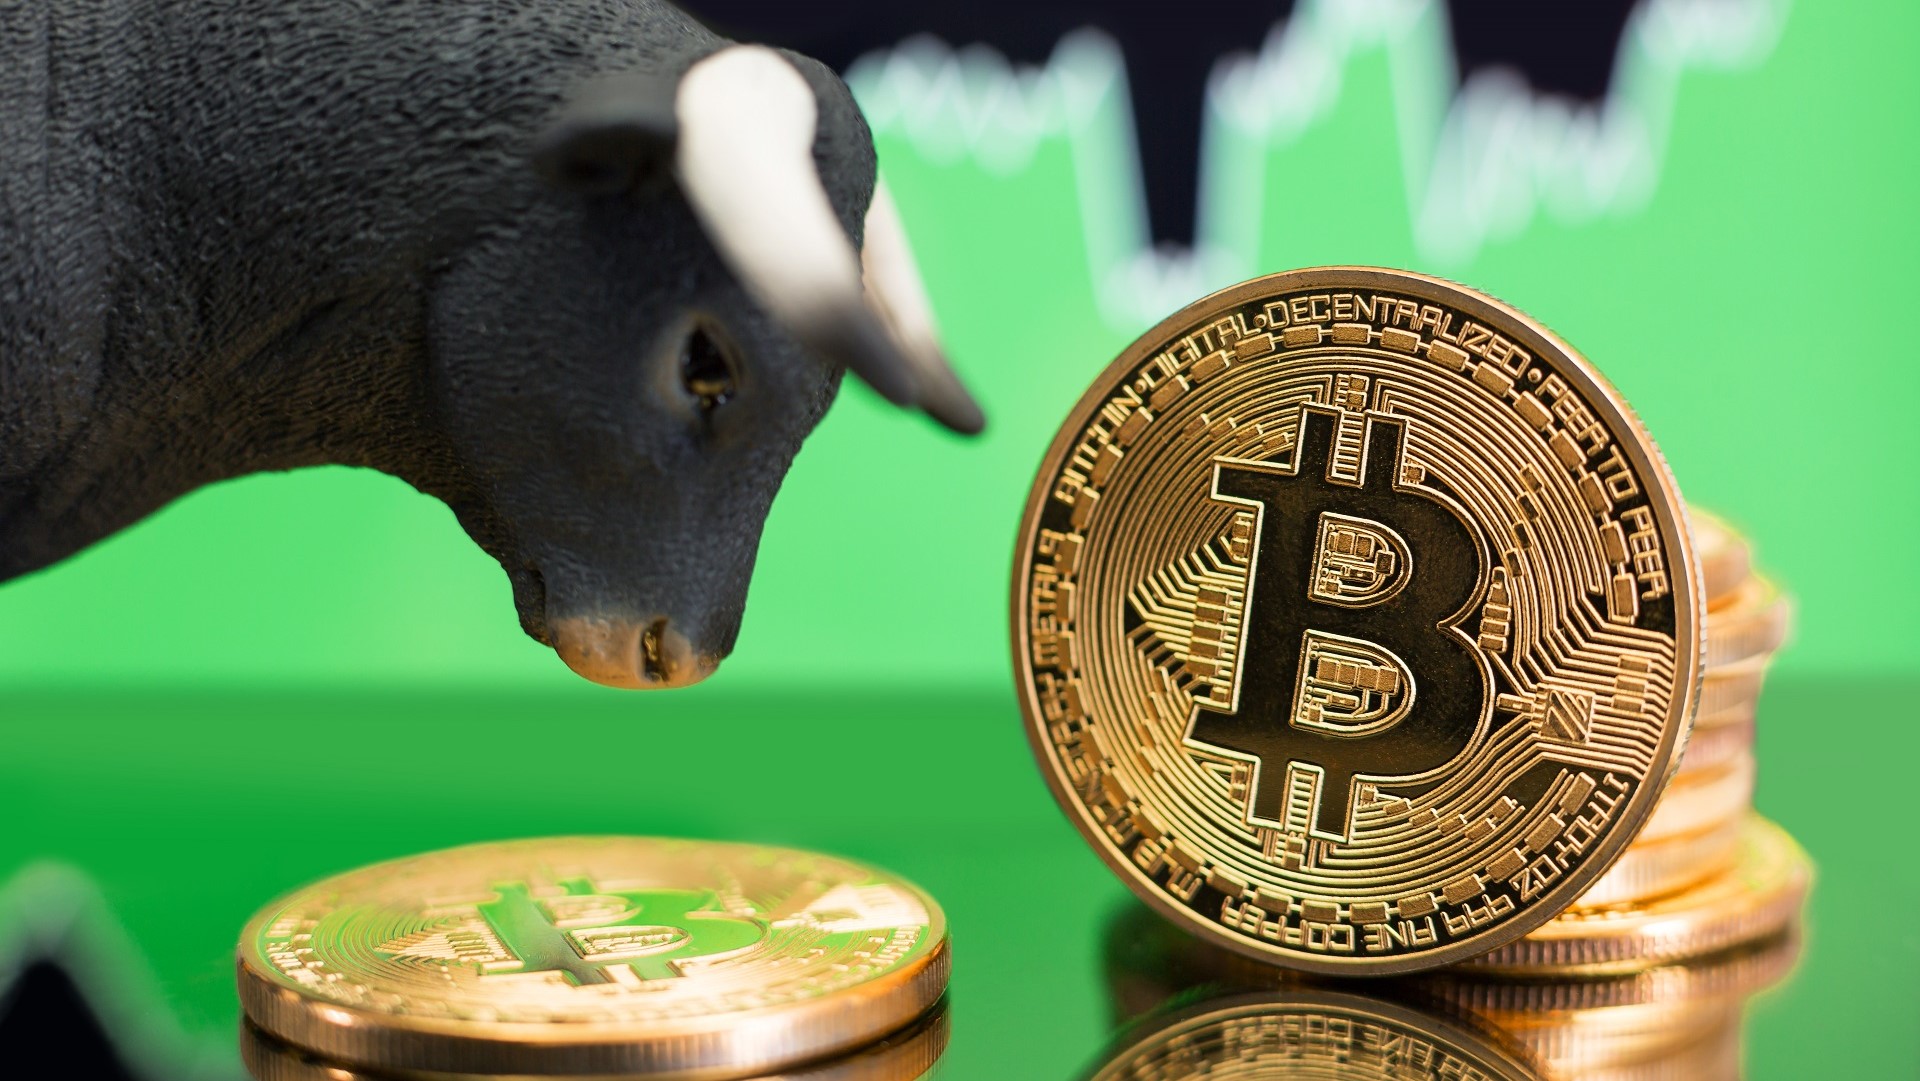 Bitcoin in early stages of a new bull run, Popular Technical Indicator Indicates